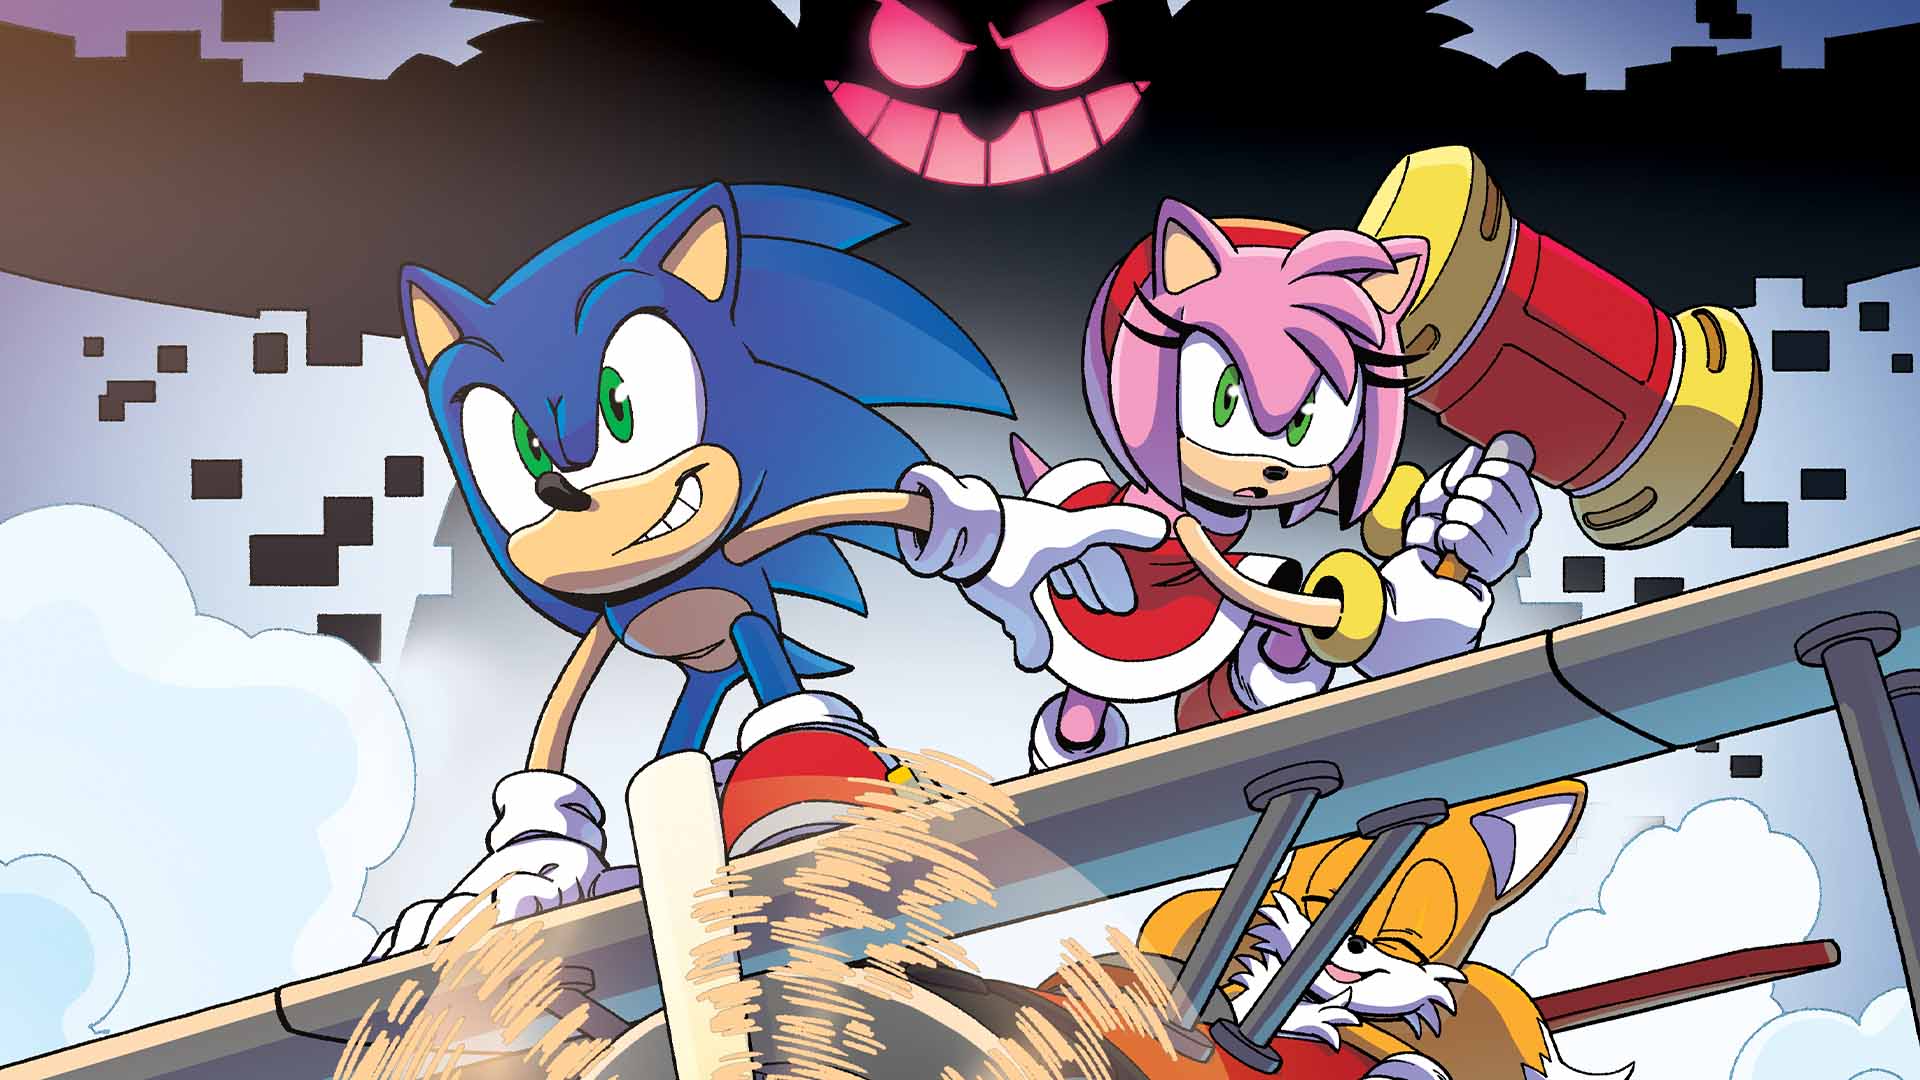 Sonic Frontiers Review - The Next Frontier